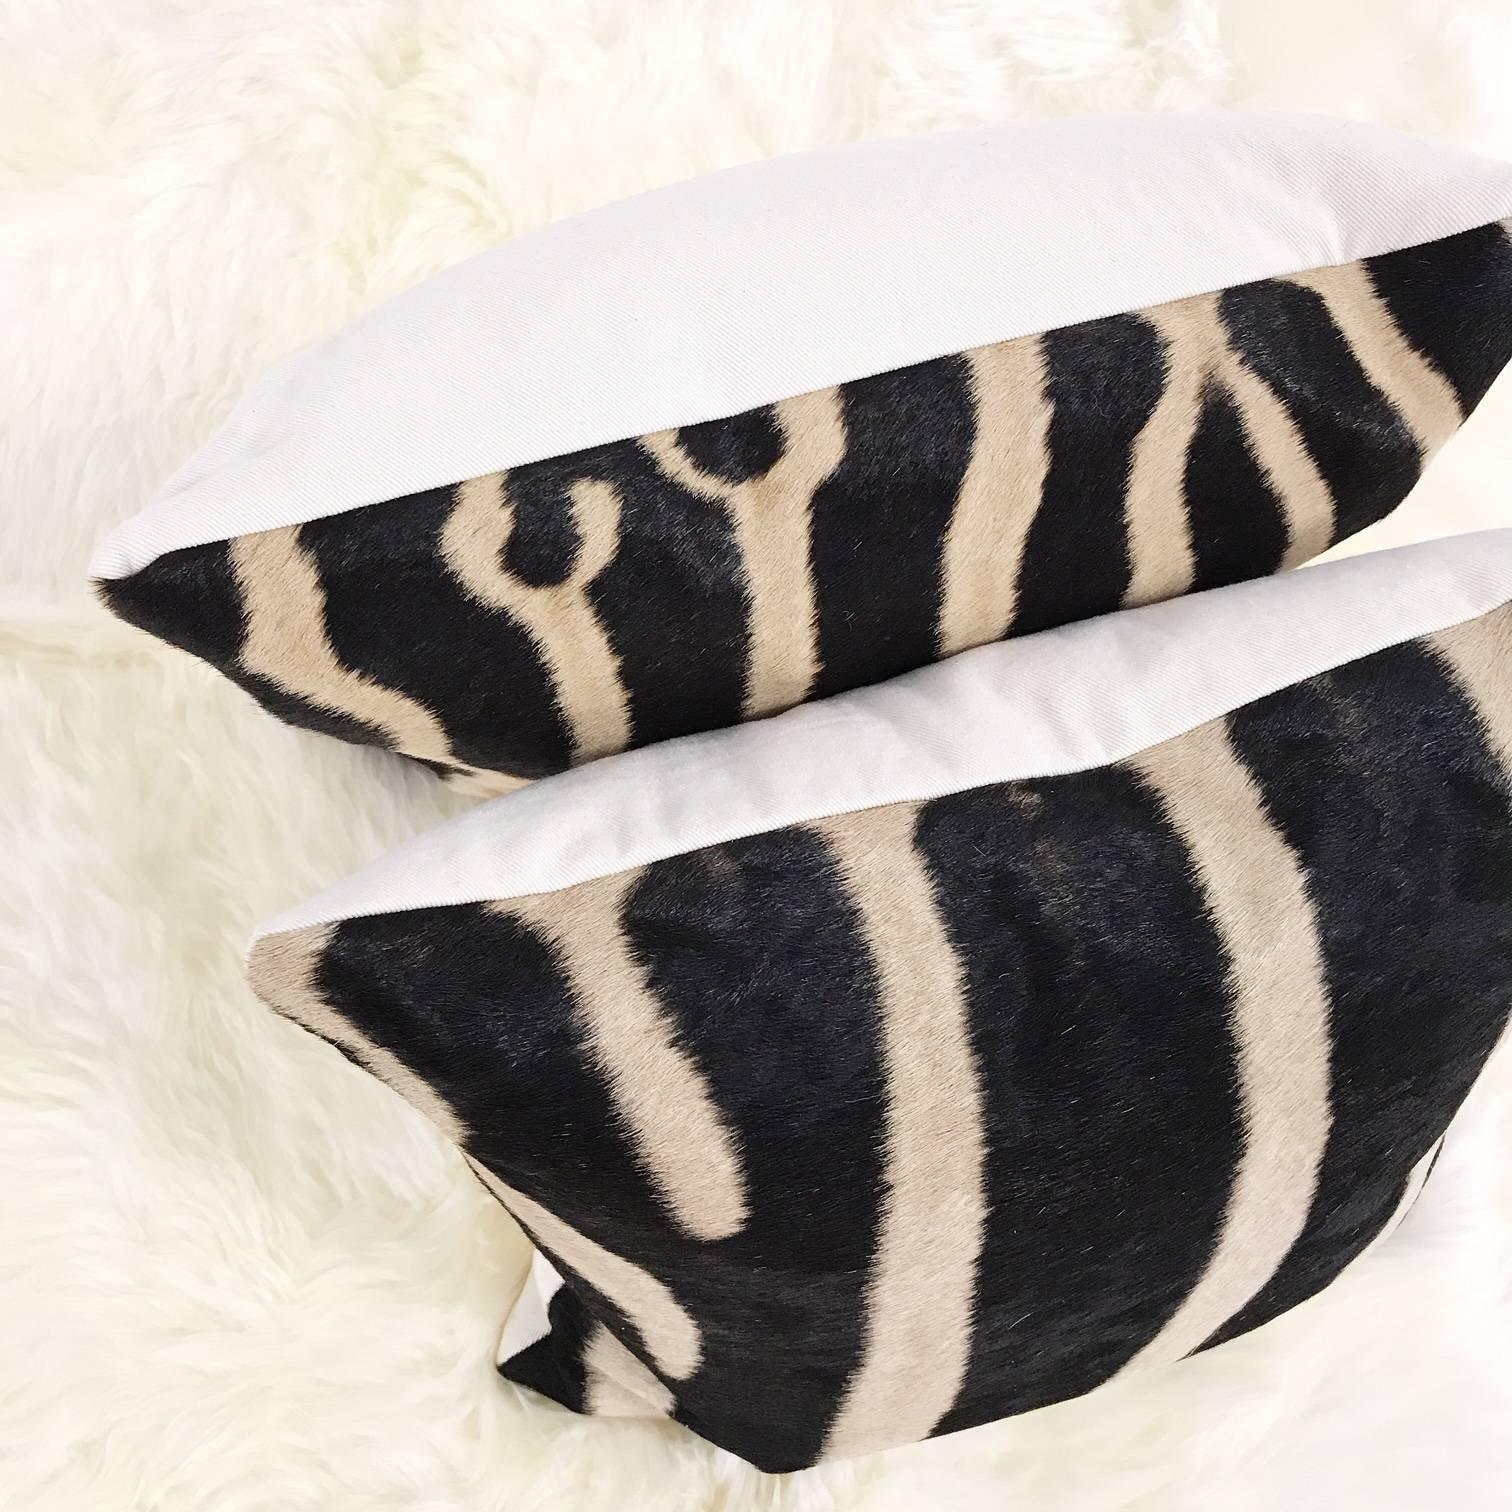 Forsyth zebra hide pillows are simply the best. The most beautiful hides are selected and hand cut, hand-stitched and hand stuffed with the finest goose down. Each step is meticulously curated by Saint Louis based Forsyth artisans. Every pillow is a